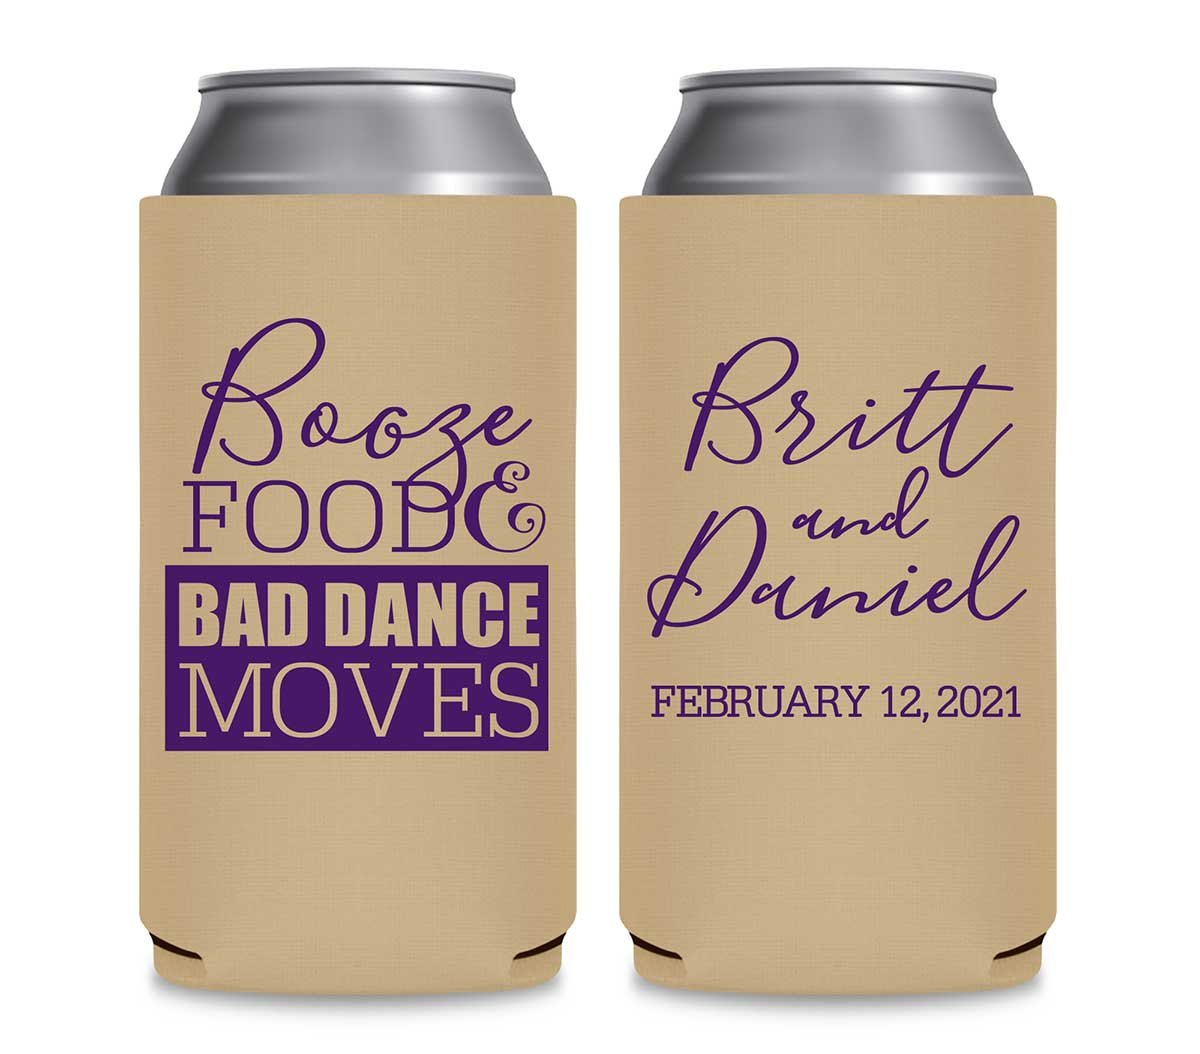 Booze Food & Bad Dance Moves 1A Foldable 12 oz Slim Can Koozies Wedding Gifts for Guests